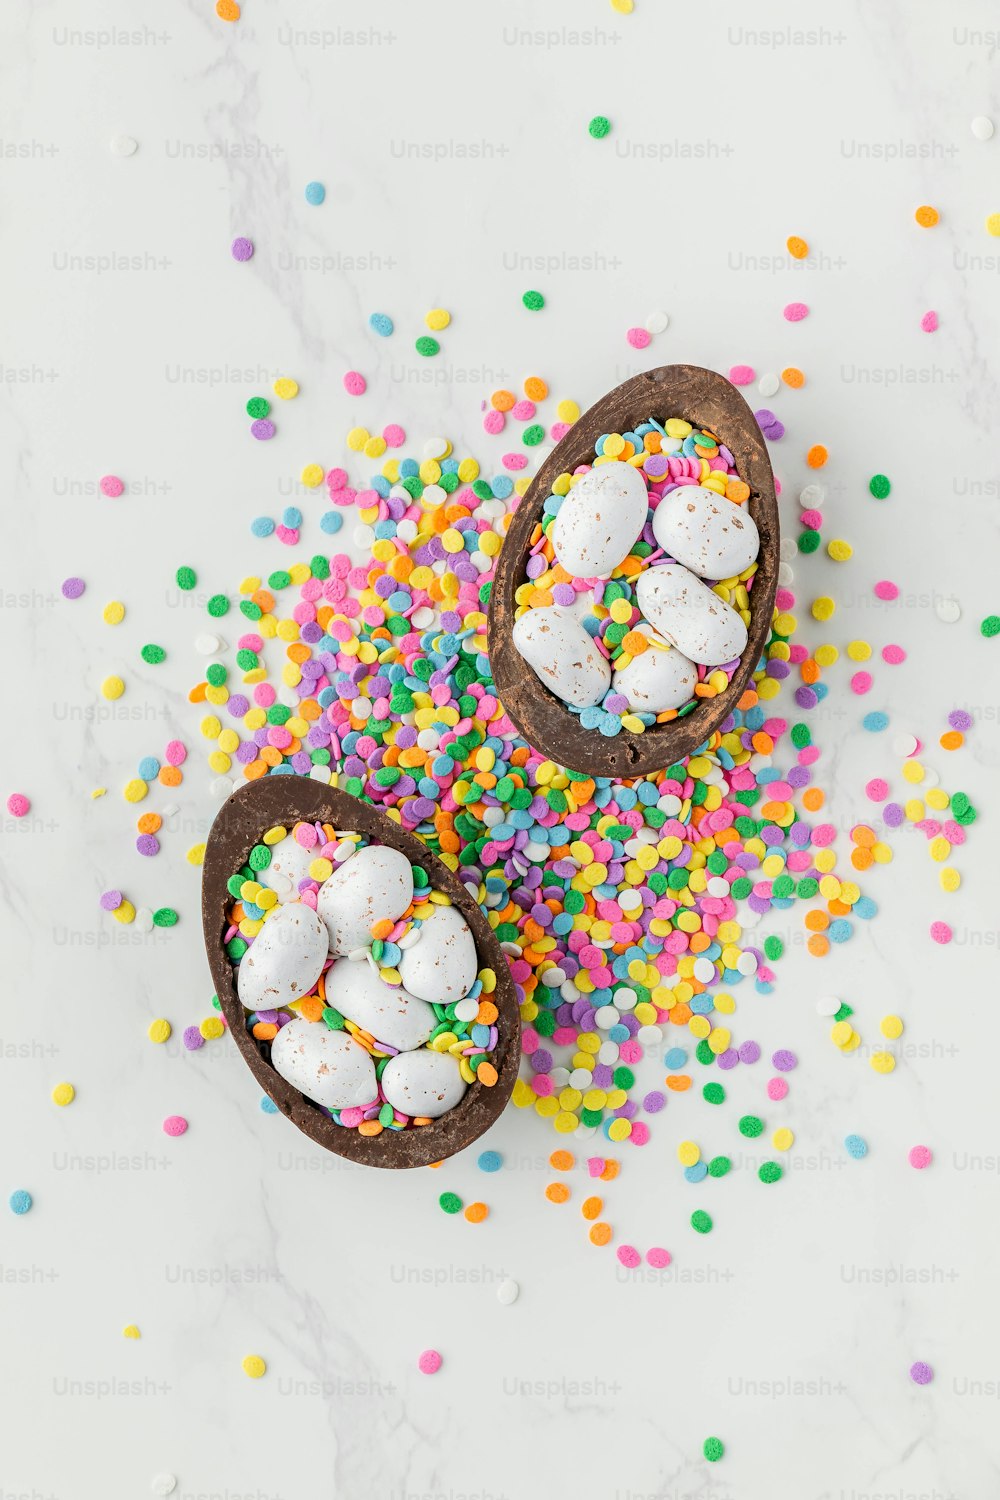 two chocolate bowls filled with colorful sprinkles